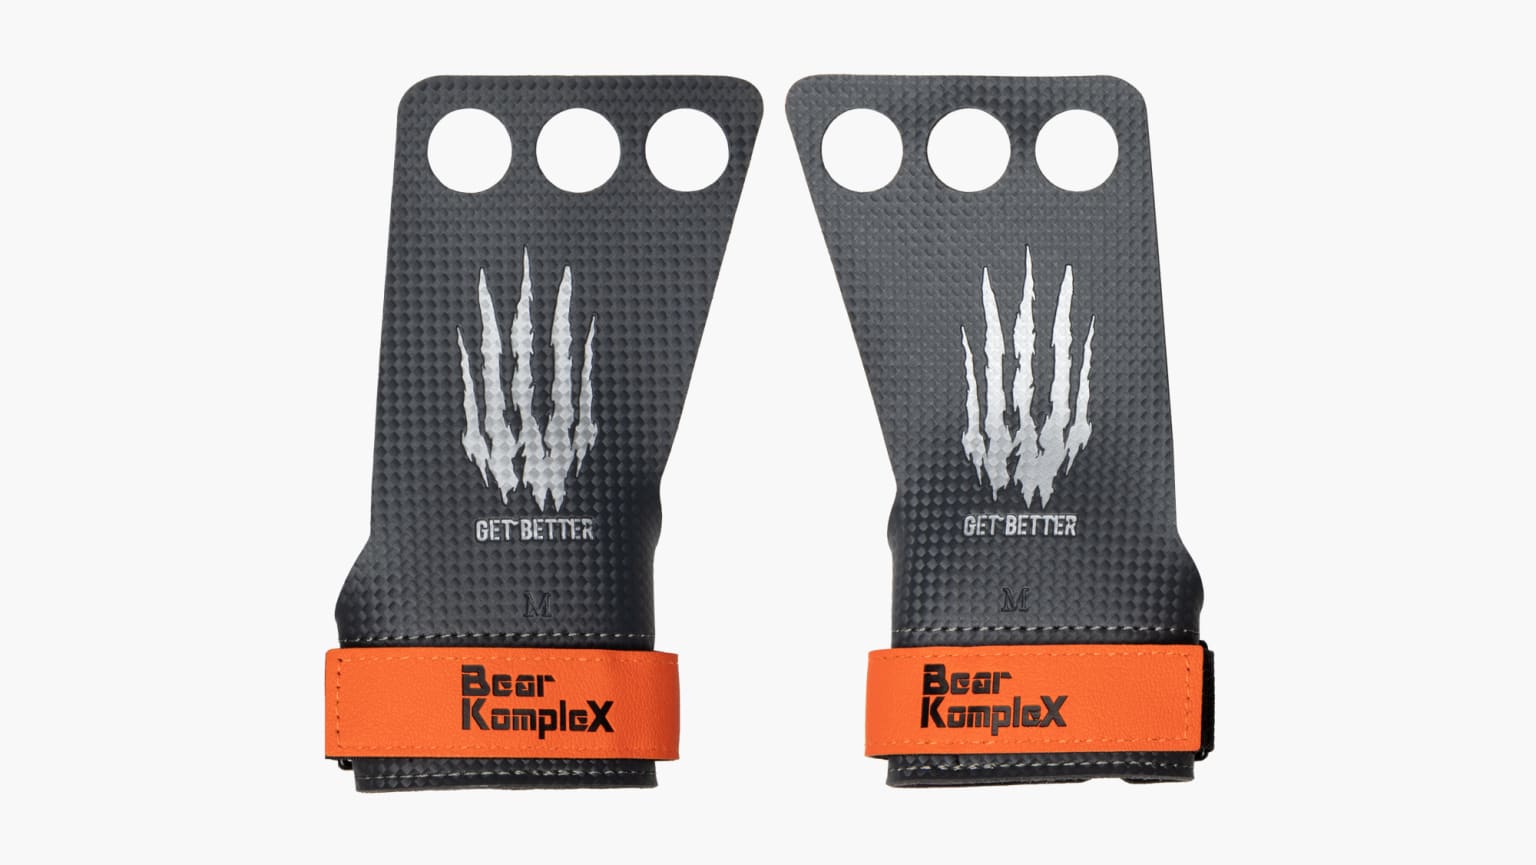 Bear KompleX 2 and 3 Hole Carbon Hand Grips for Gymnastics, Crossfit, Pull-ups, Weightlifting. WODs with Wrist Straps, Comfort and Support